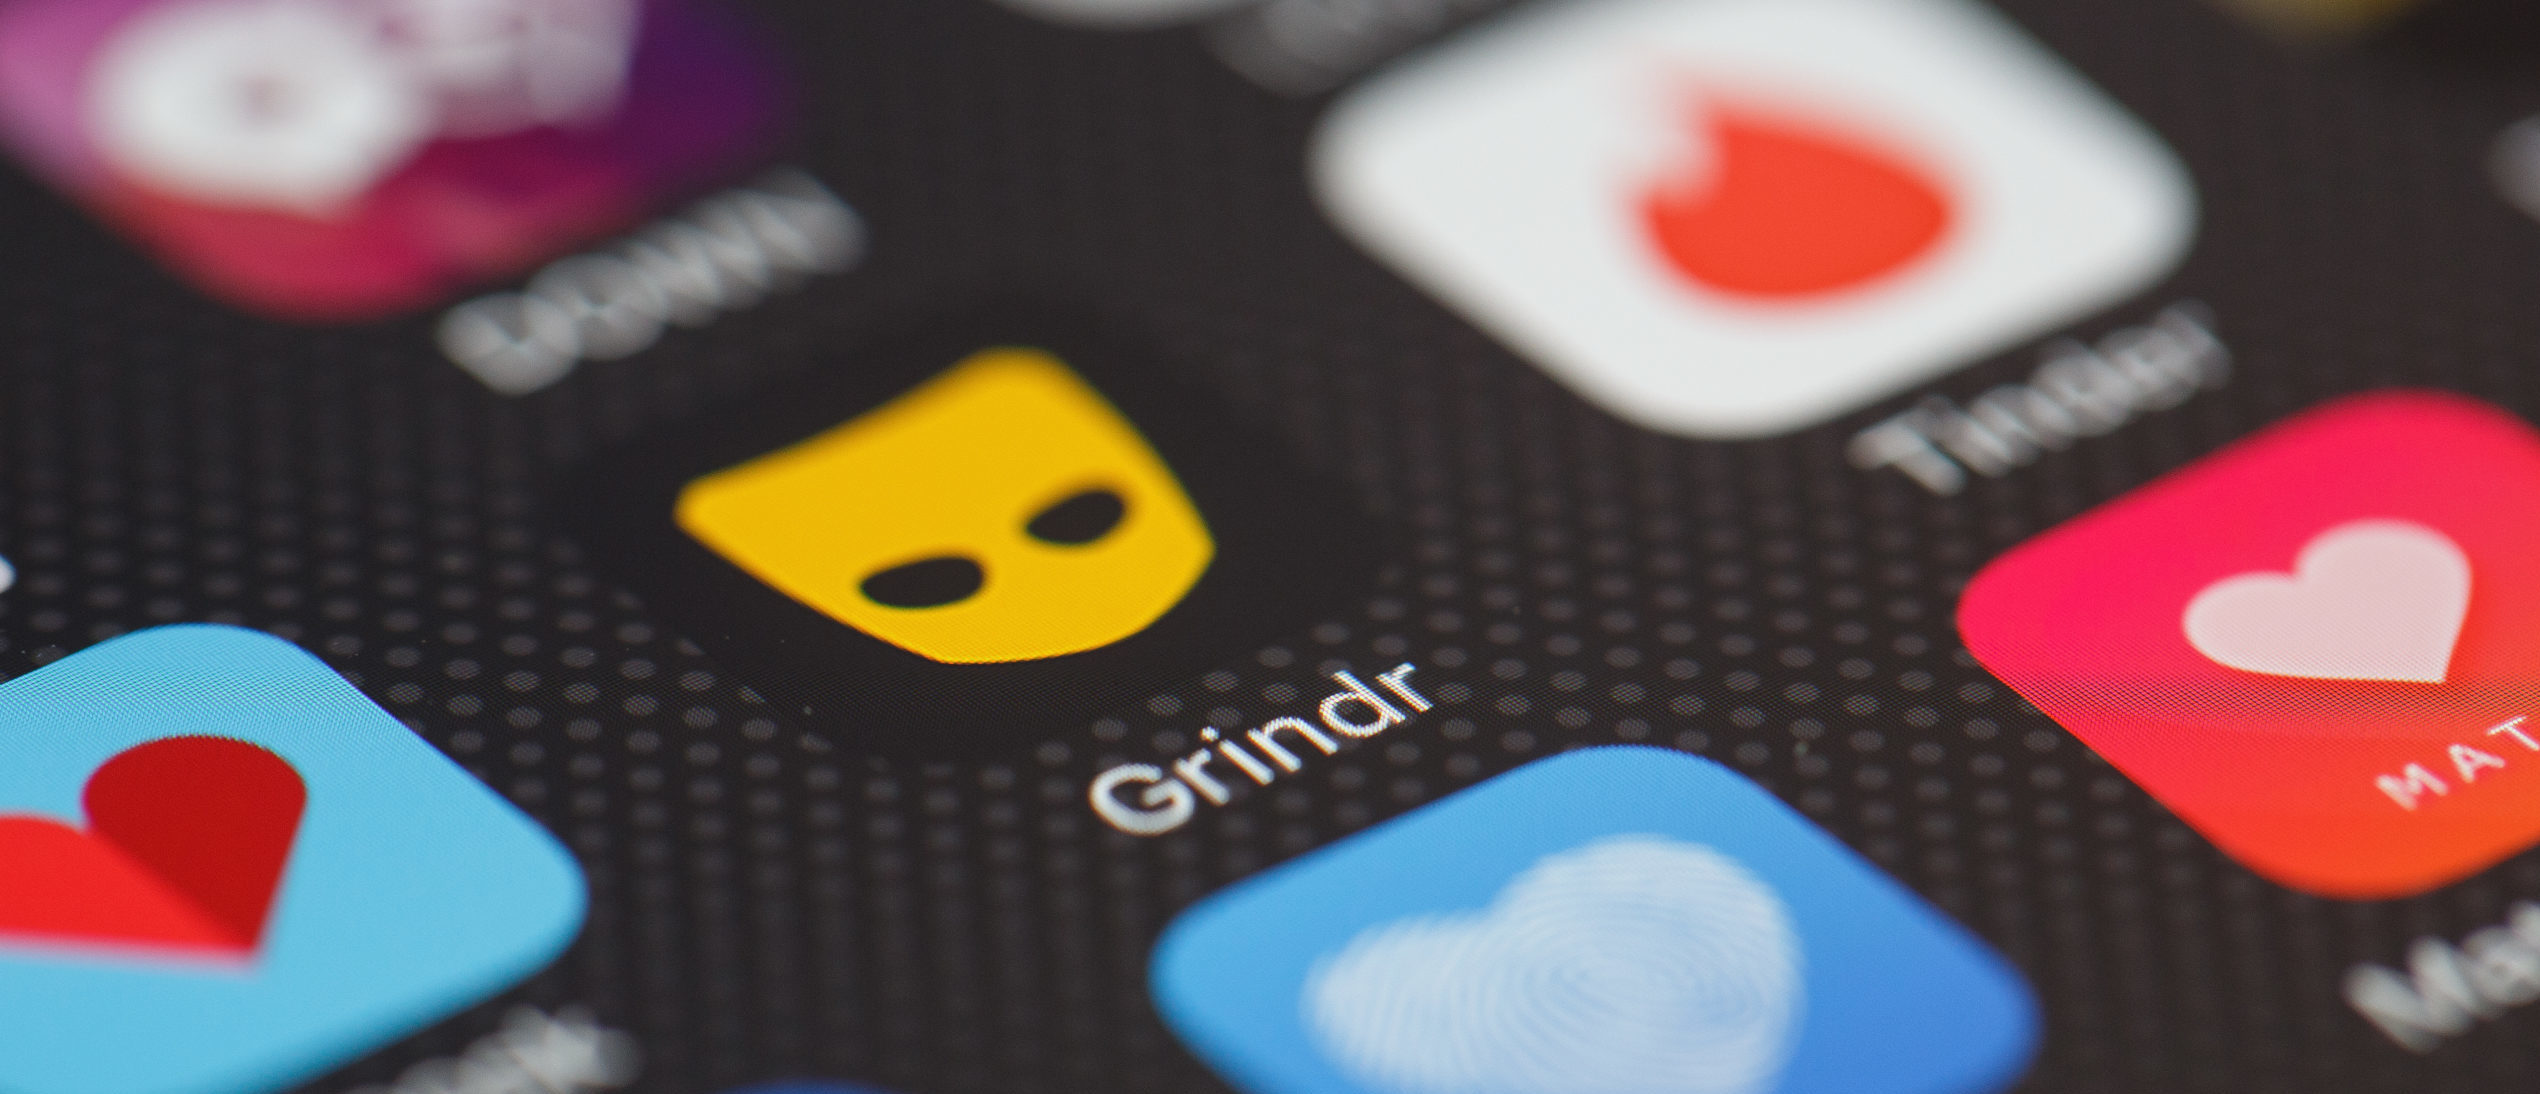 LONDON, ENGLAND - NOVEMBER 24: The "Grindr" app logo is seen amongst other dating apps on a mobile phone screen on November 24, 2016 in London, England. Following a number of deaths linked to the use of anonymous online dating apps, the police have warned users to be aware of the risks involved, following the growth in the scale of violence and sexual assaults linked to their use. (Photo by Leon Neal/Getty Images)